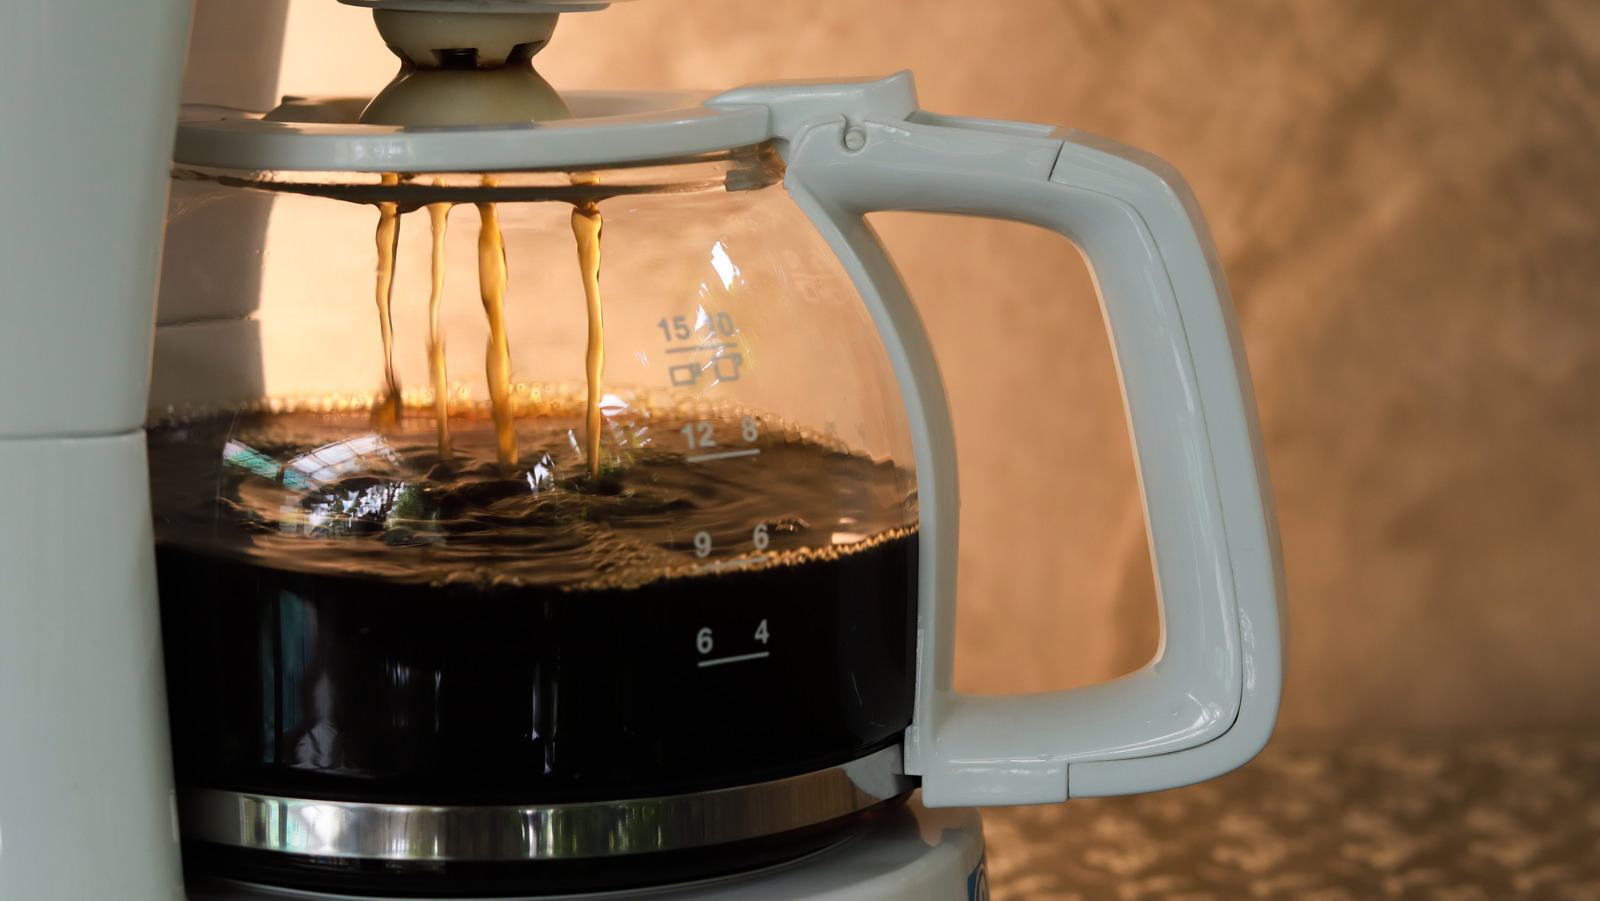 Why You Should Never Use Milk In Your Coffee Maker